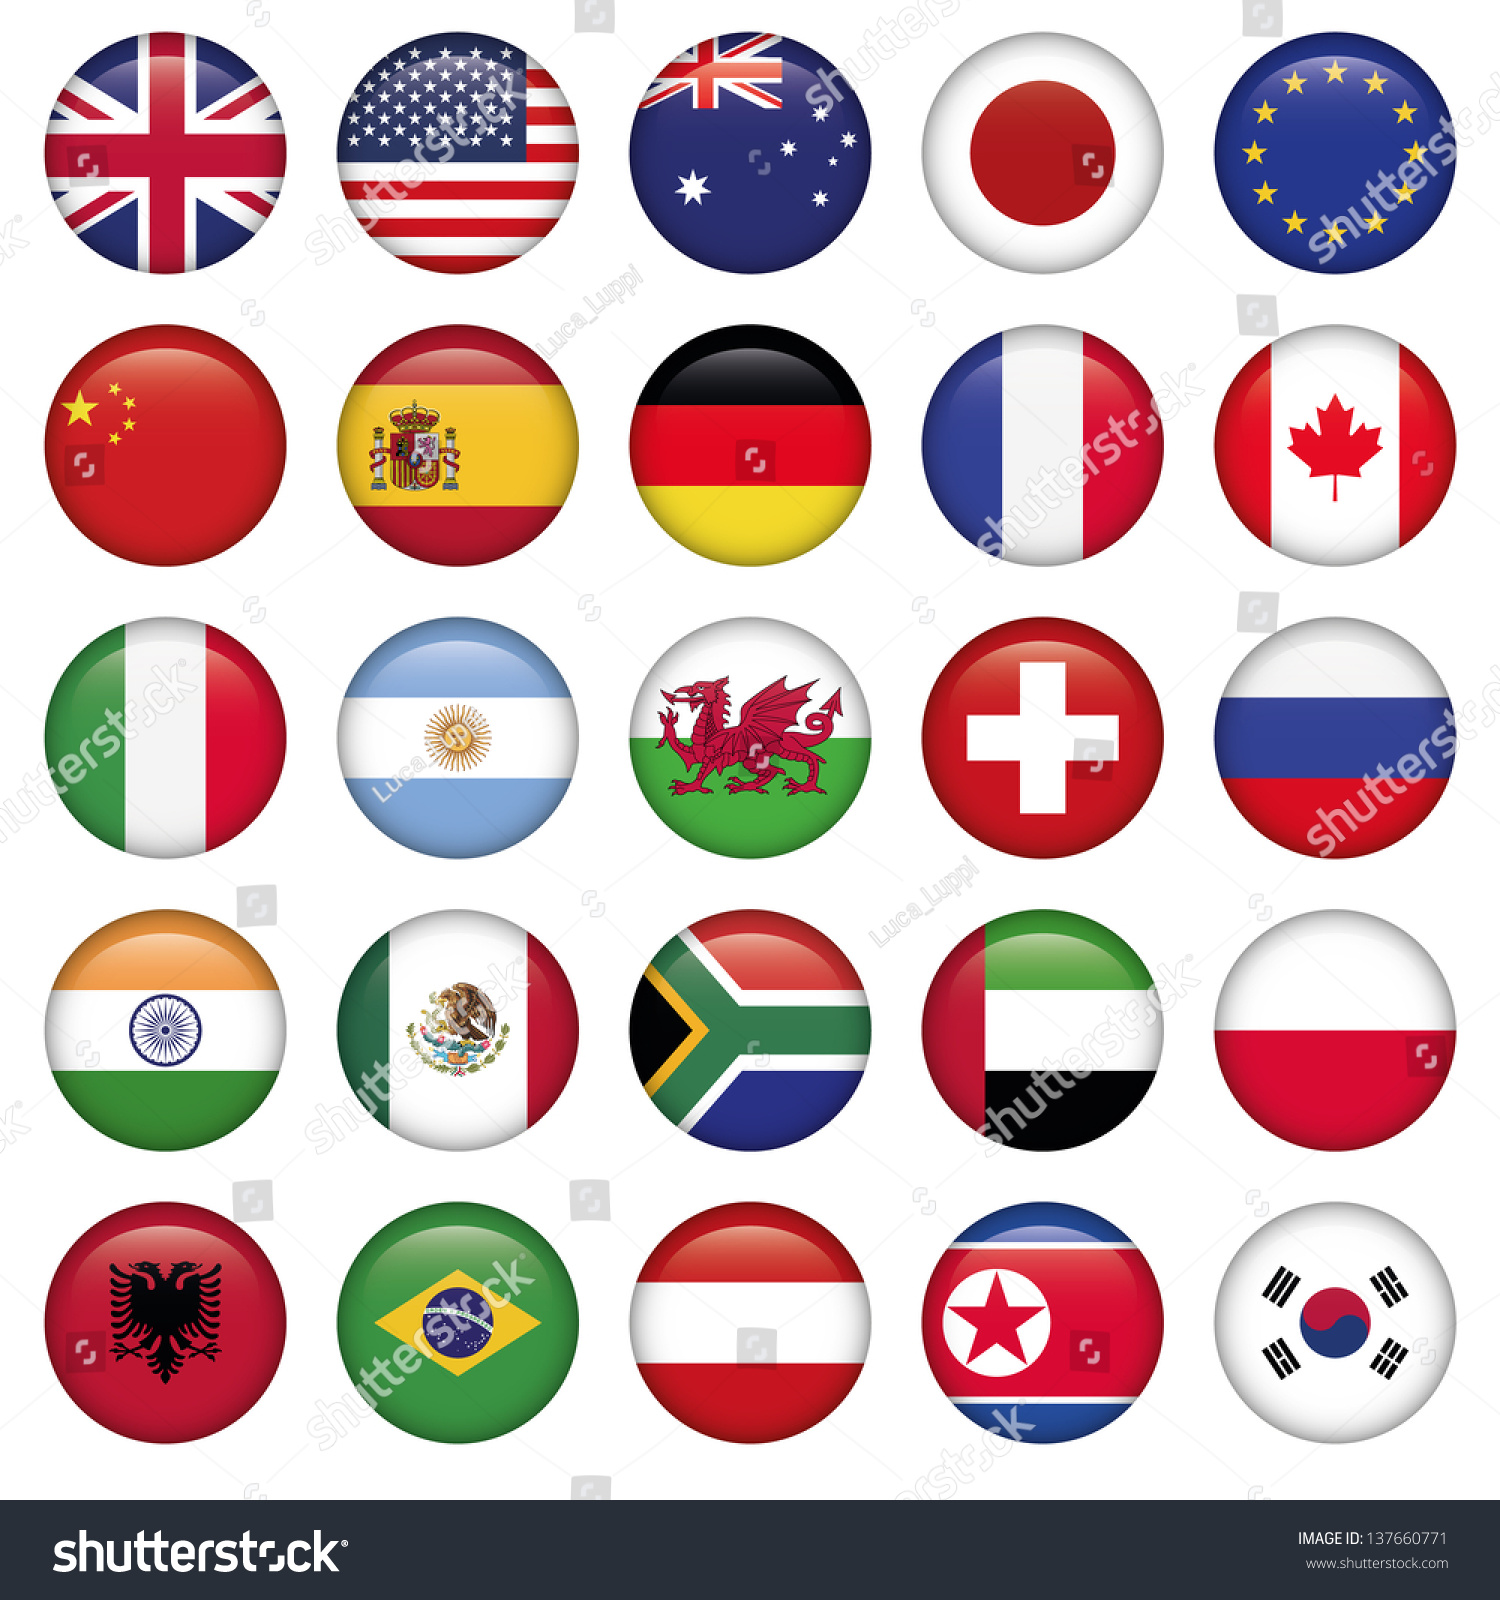 Set of Round Flags world top states #137660771